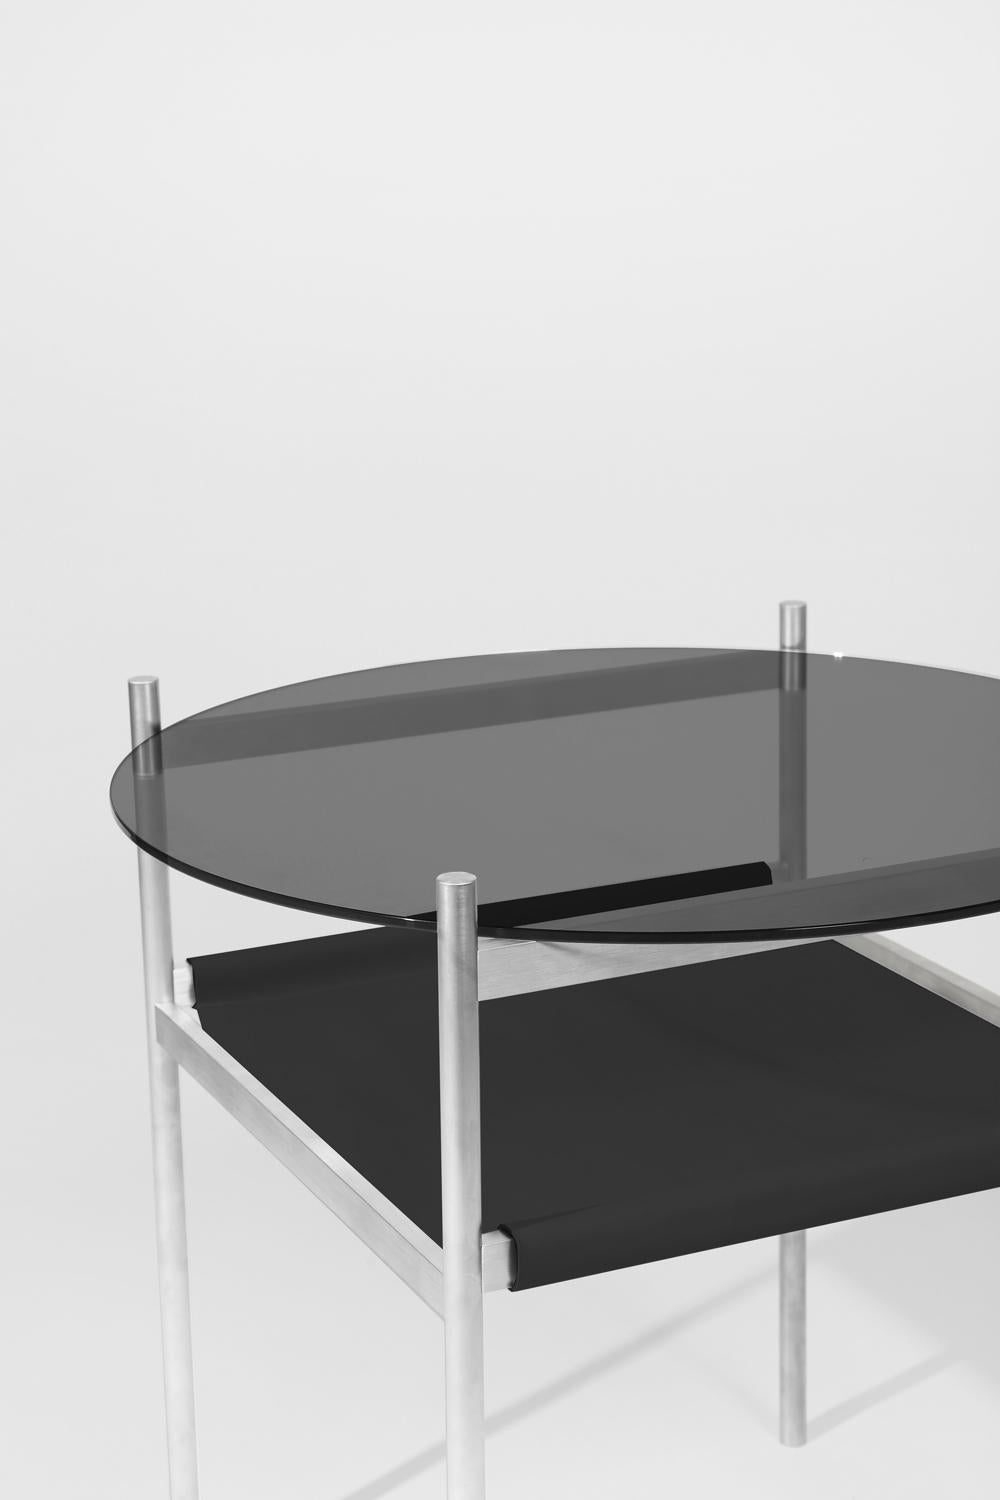 Made to order. Please allow 6 weeks for production.

Aluminium frame / Smoked glass / Black leather sling.

The Duotone Furniture series is based on a modular hardware system that pairs sturdy construction with visual lightness and a range of